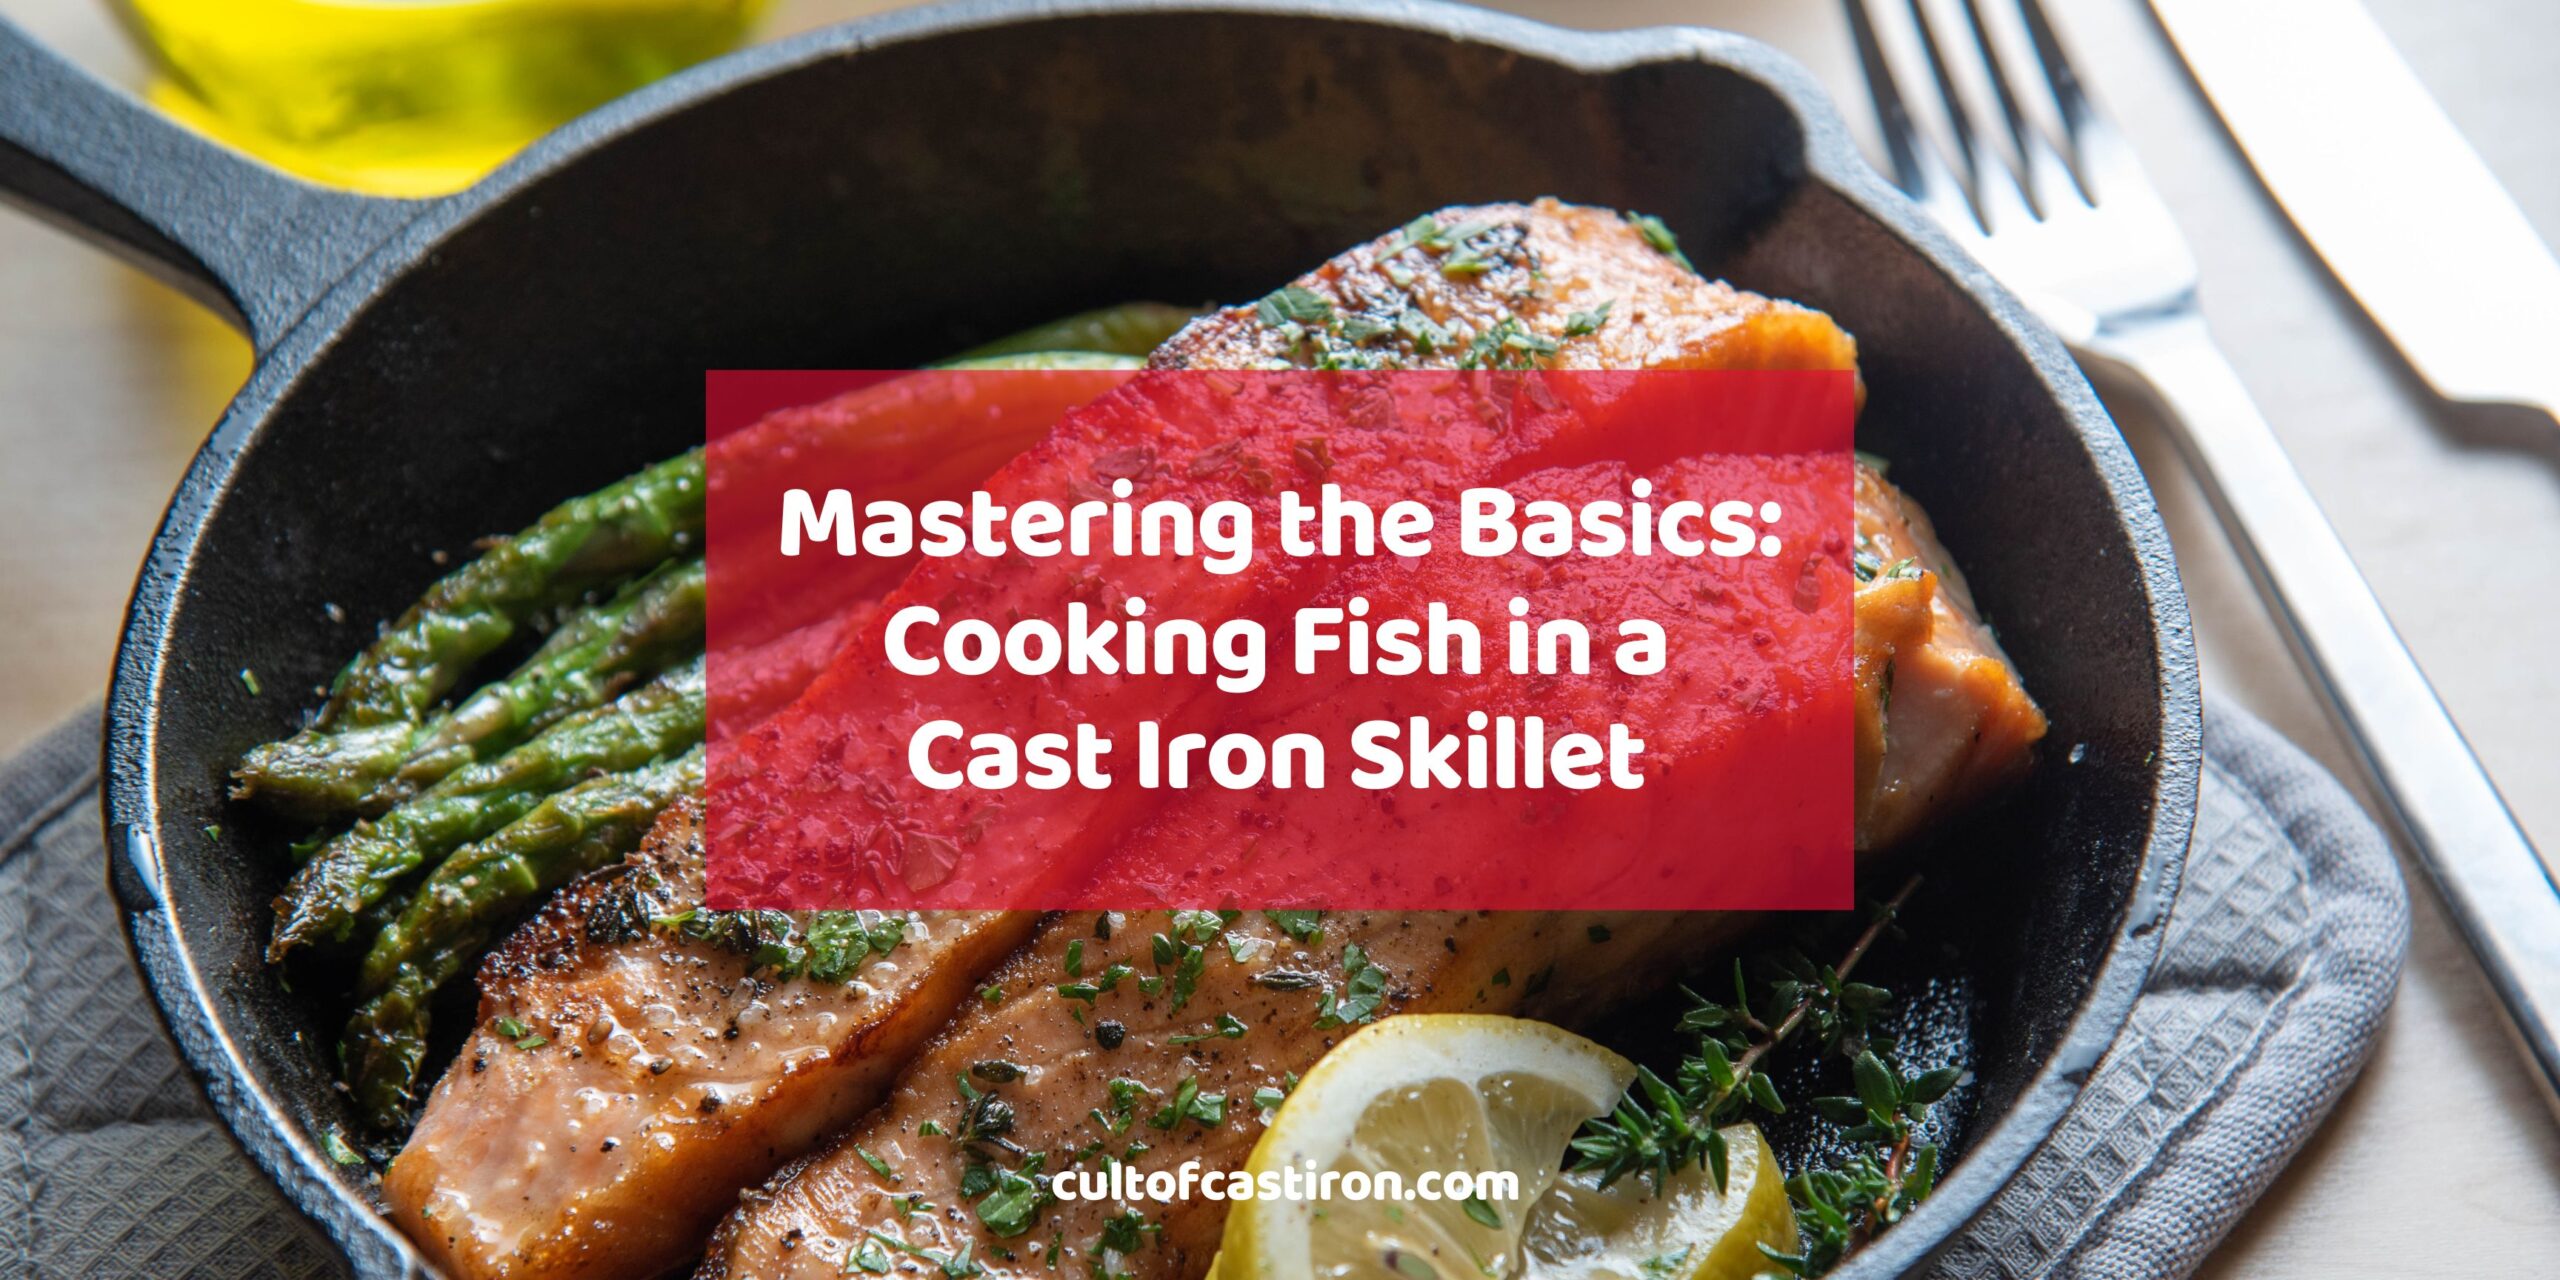 https://cultofcastiron.com/wp-content/uploads/2023/10/Mastering-the-Basics-of-Cooking-Fish-in-Cast-Iron-scaled.jpg